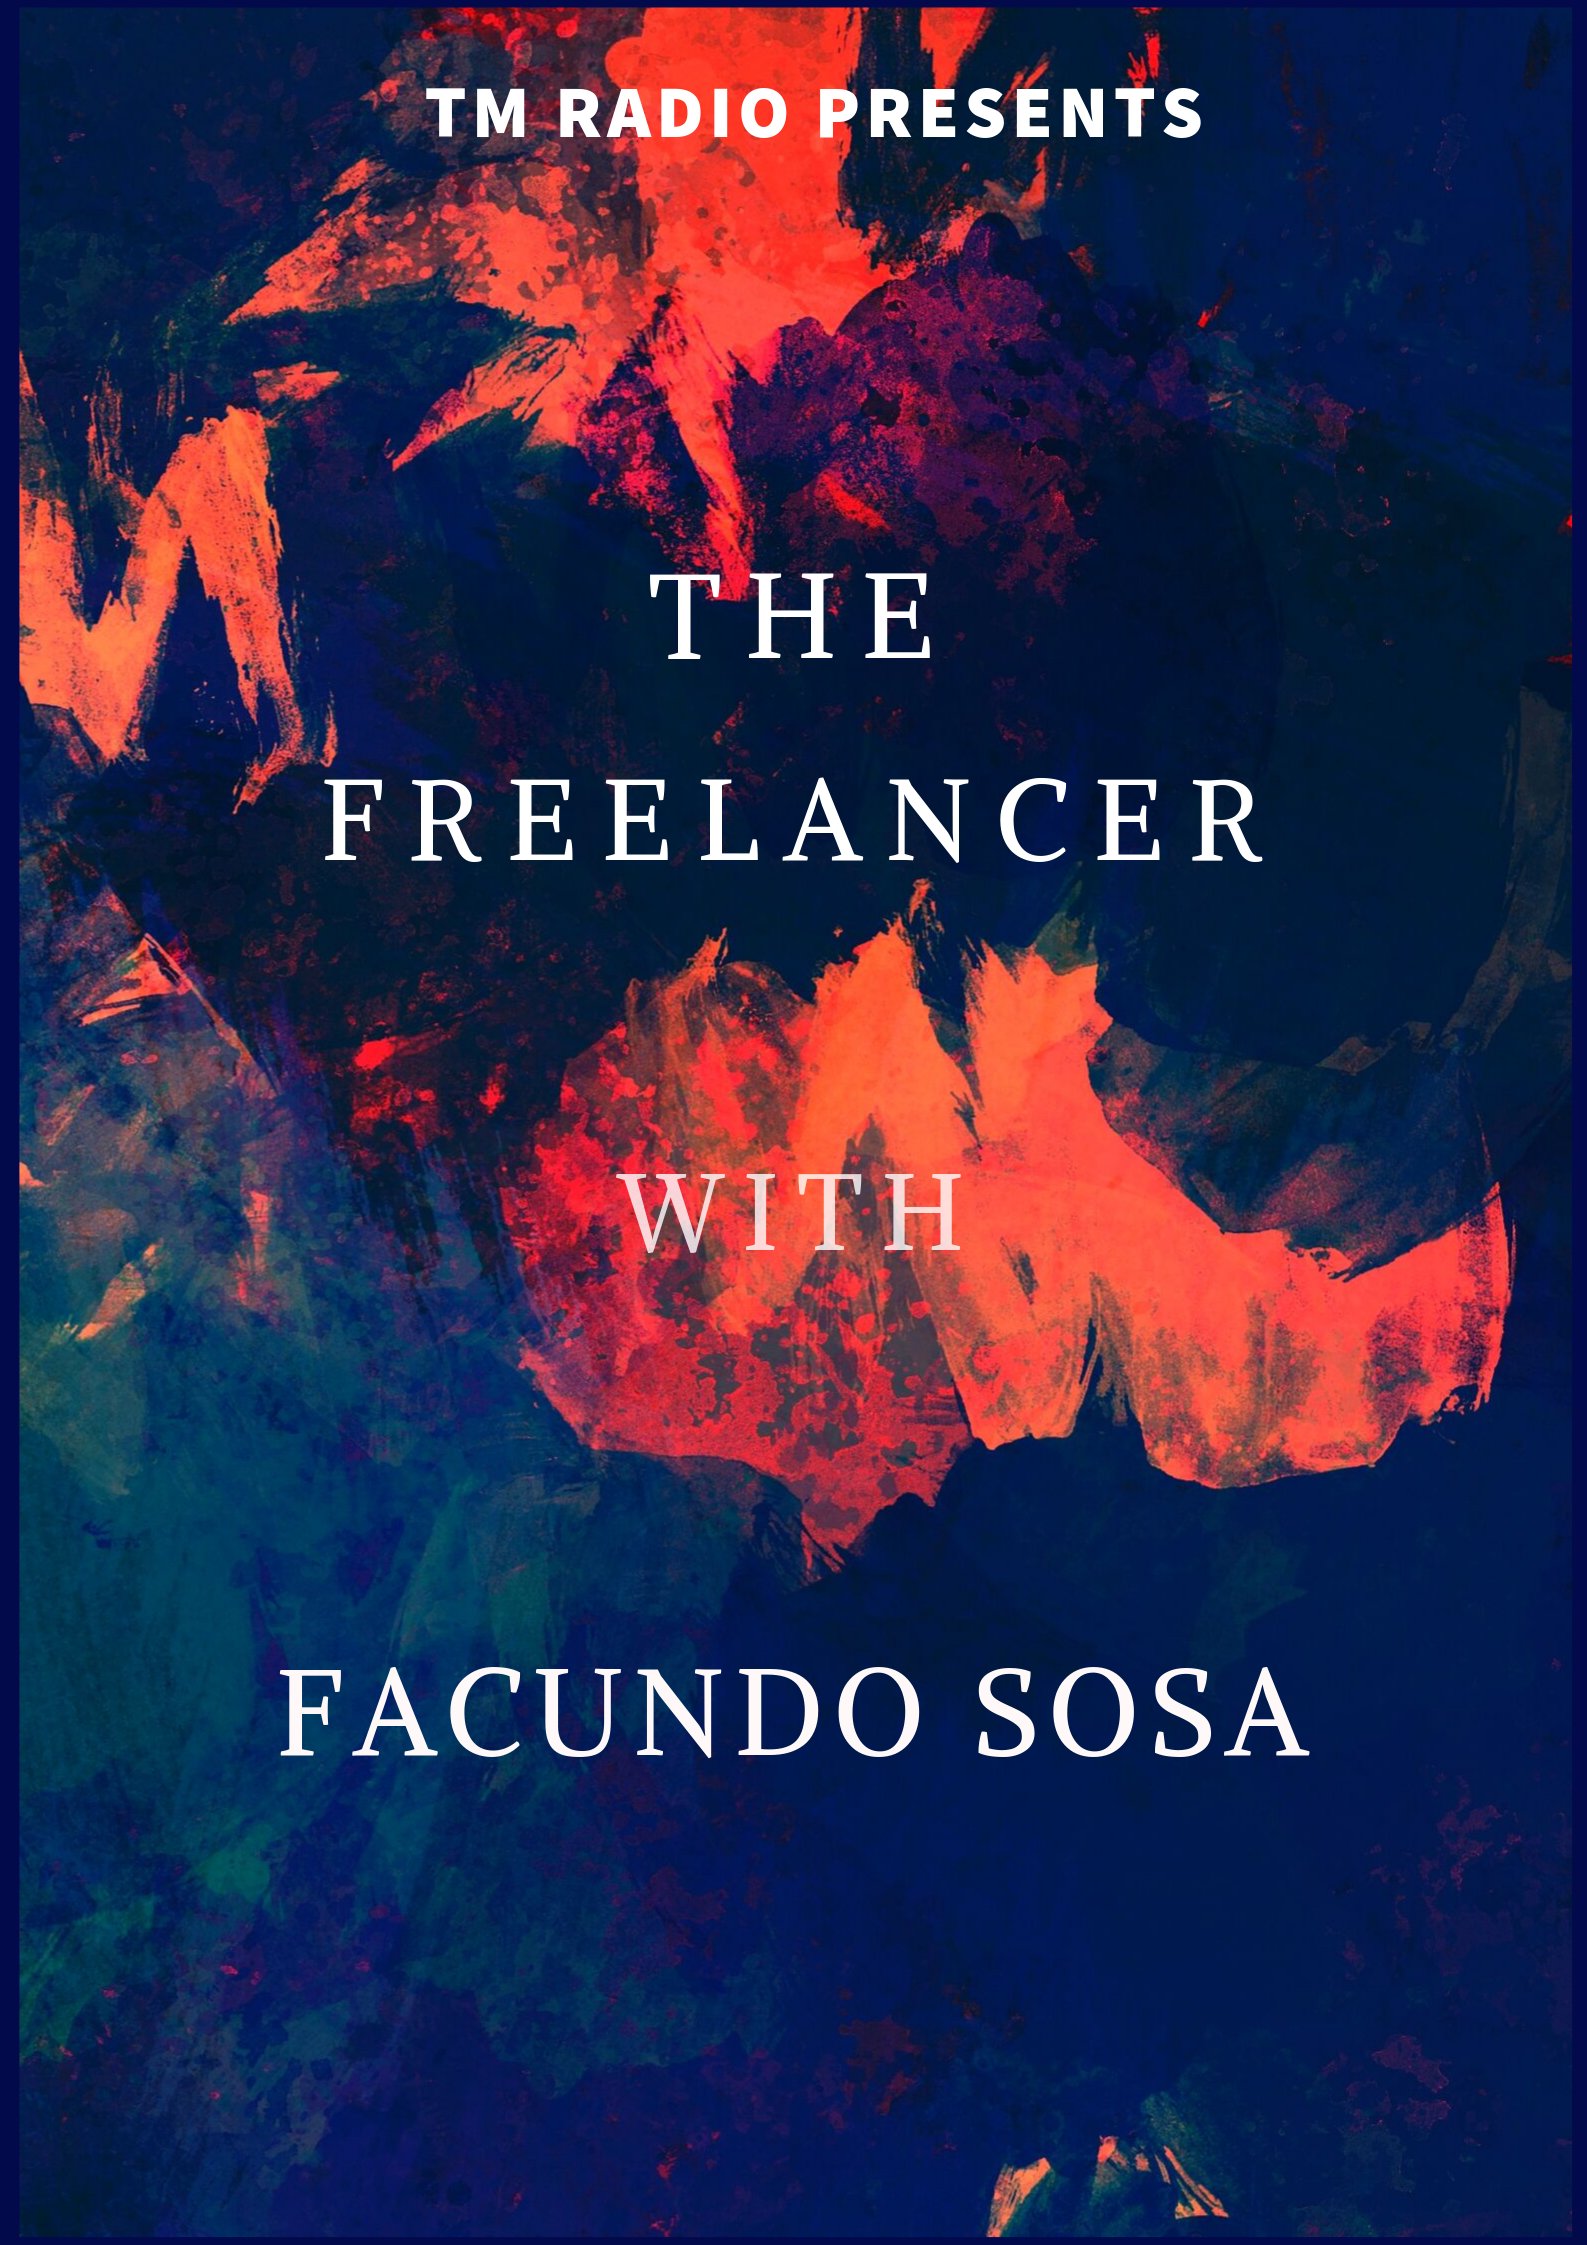 The Freelancer :: Episode 015 (aired on July 25th, 2020) banner logo